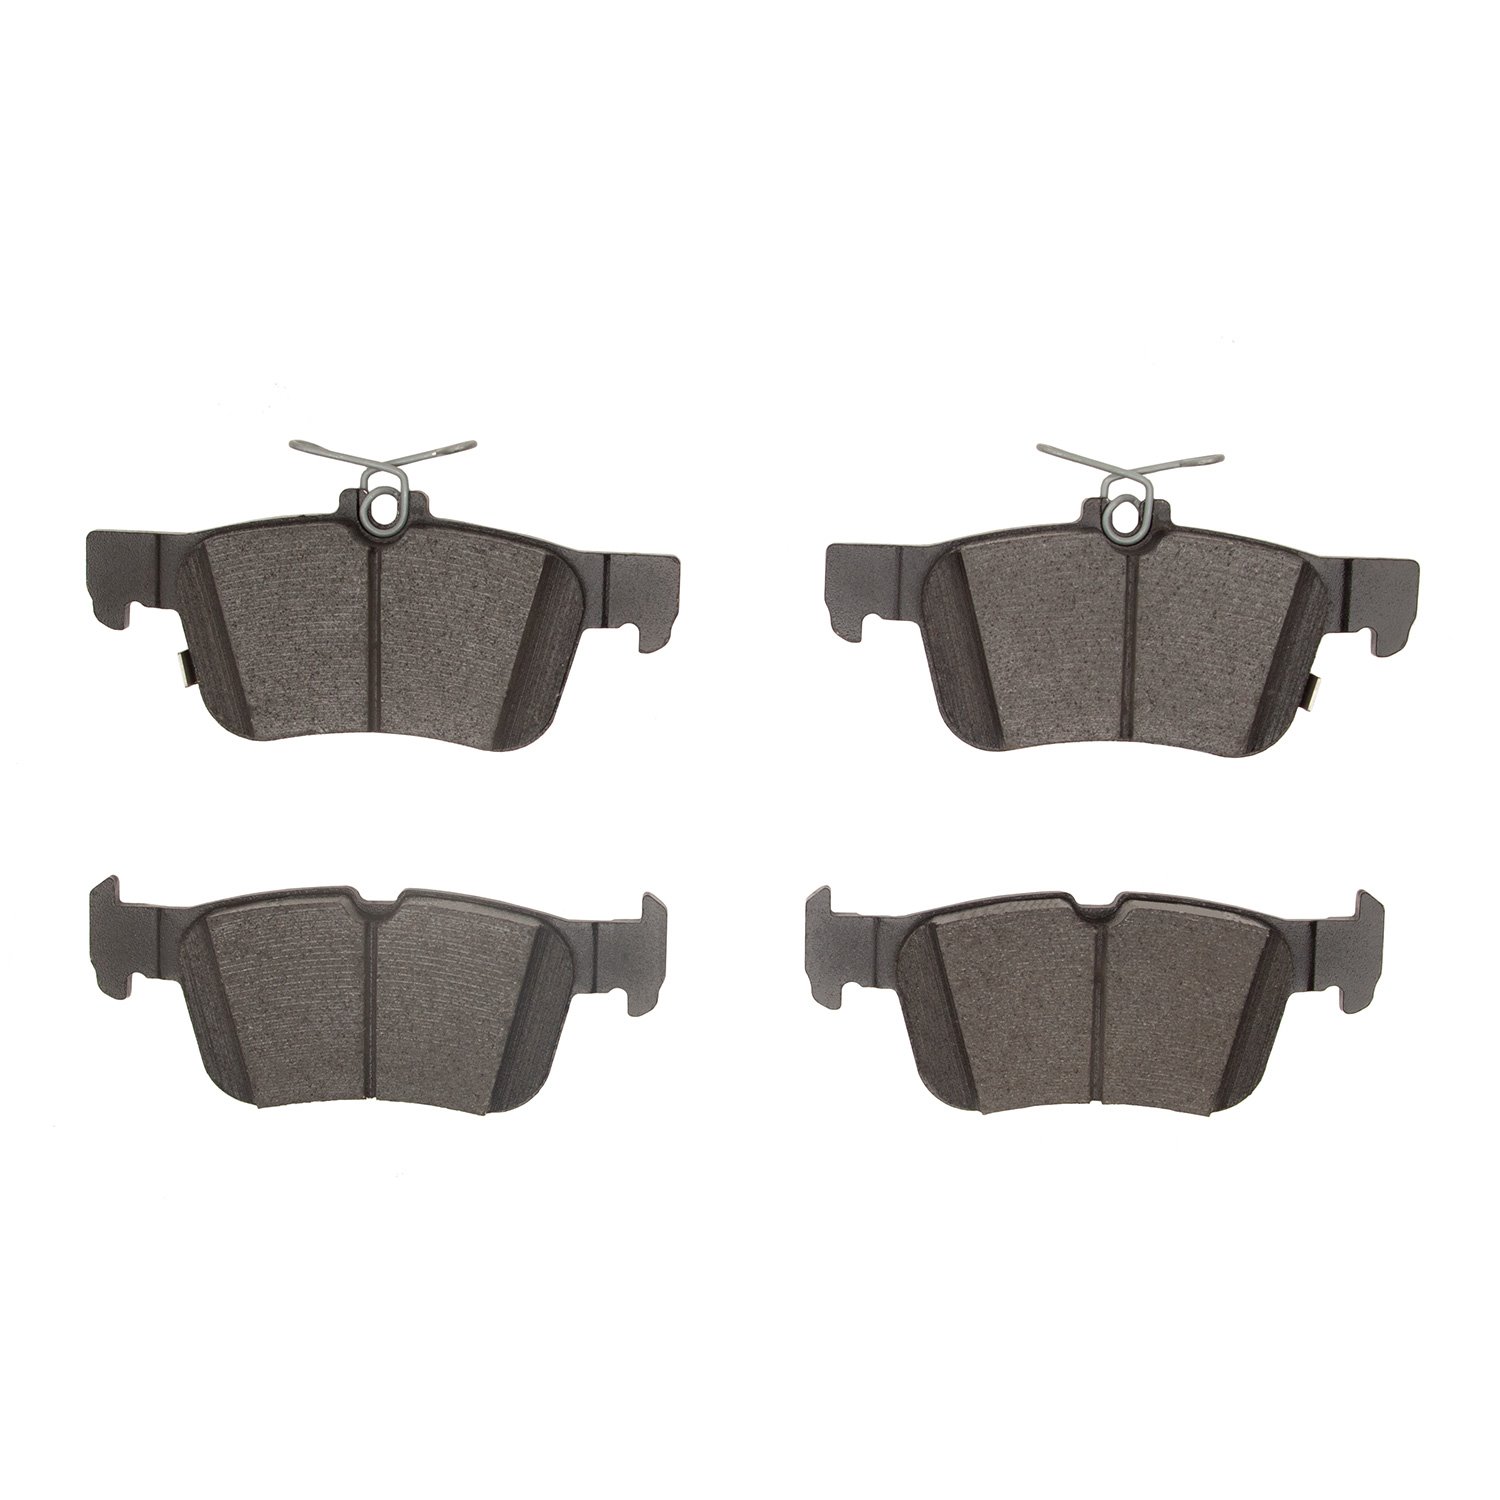 Optimum OE Brake Pads, Fits Select Ford/Lincoln/Mercury/Mazda, Position: Rear